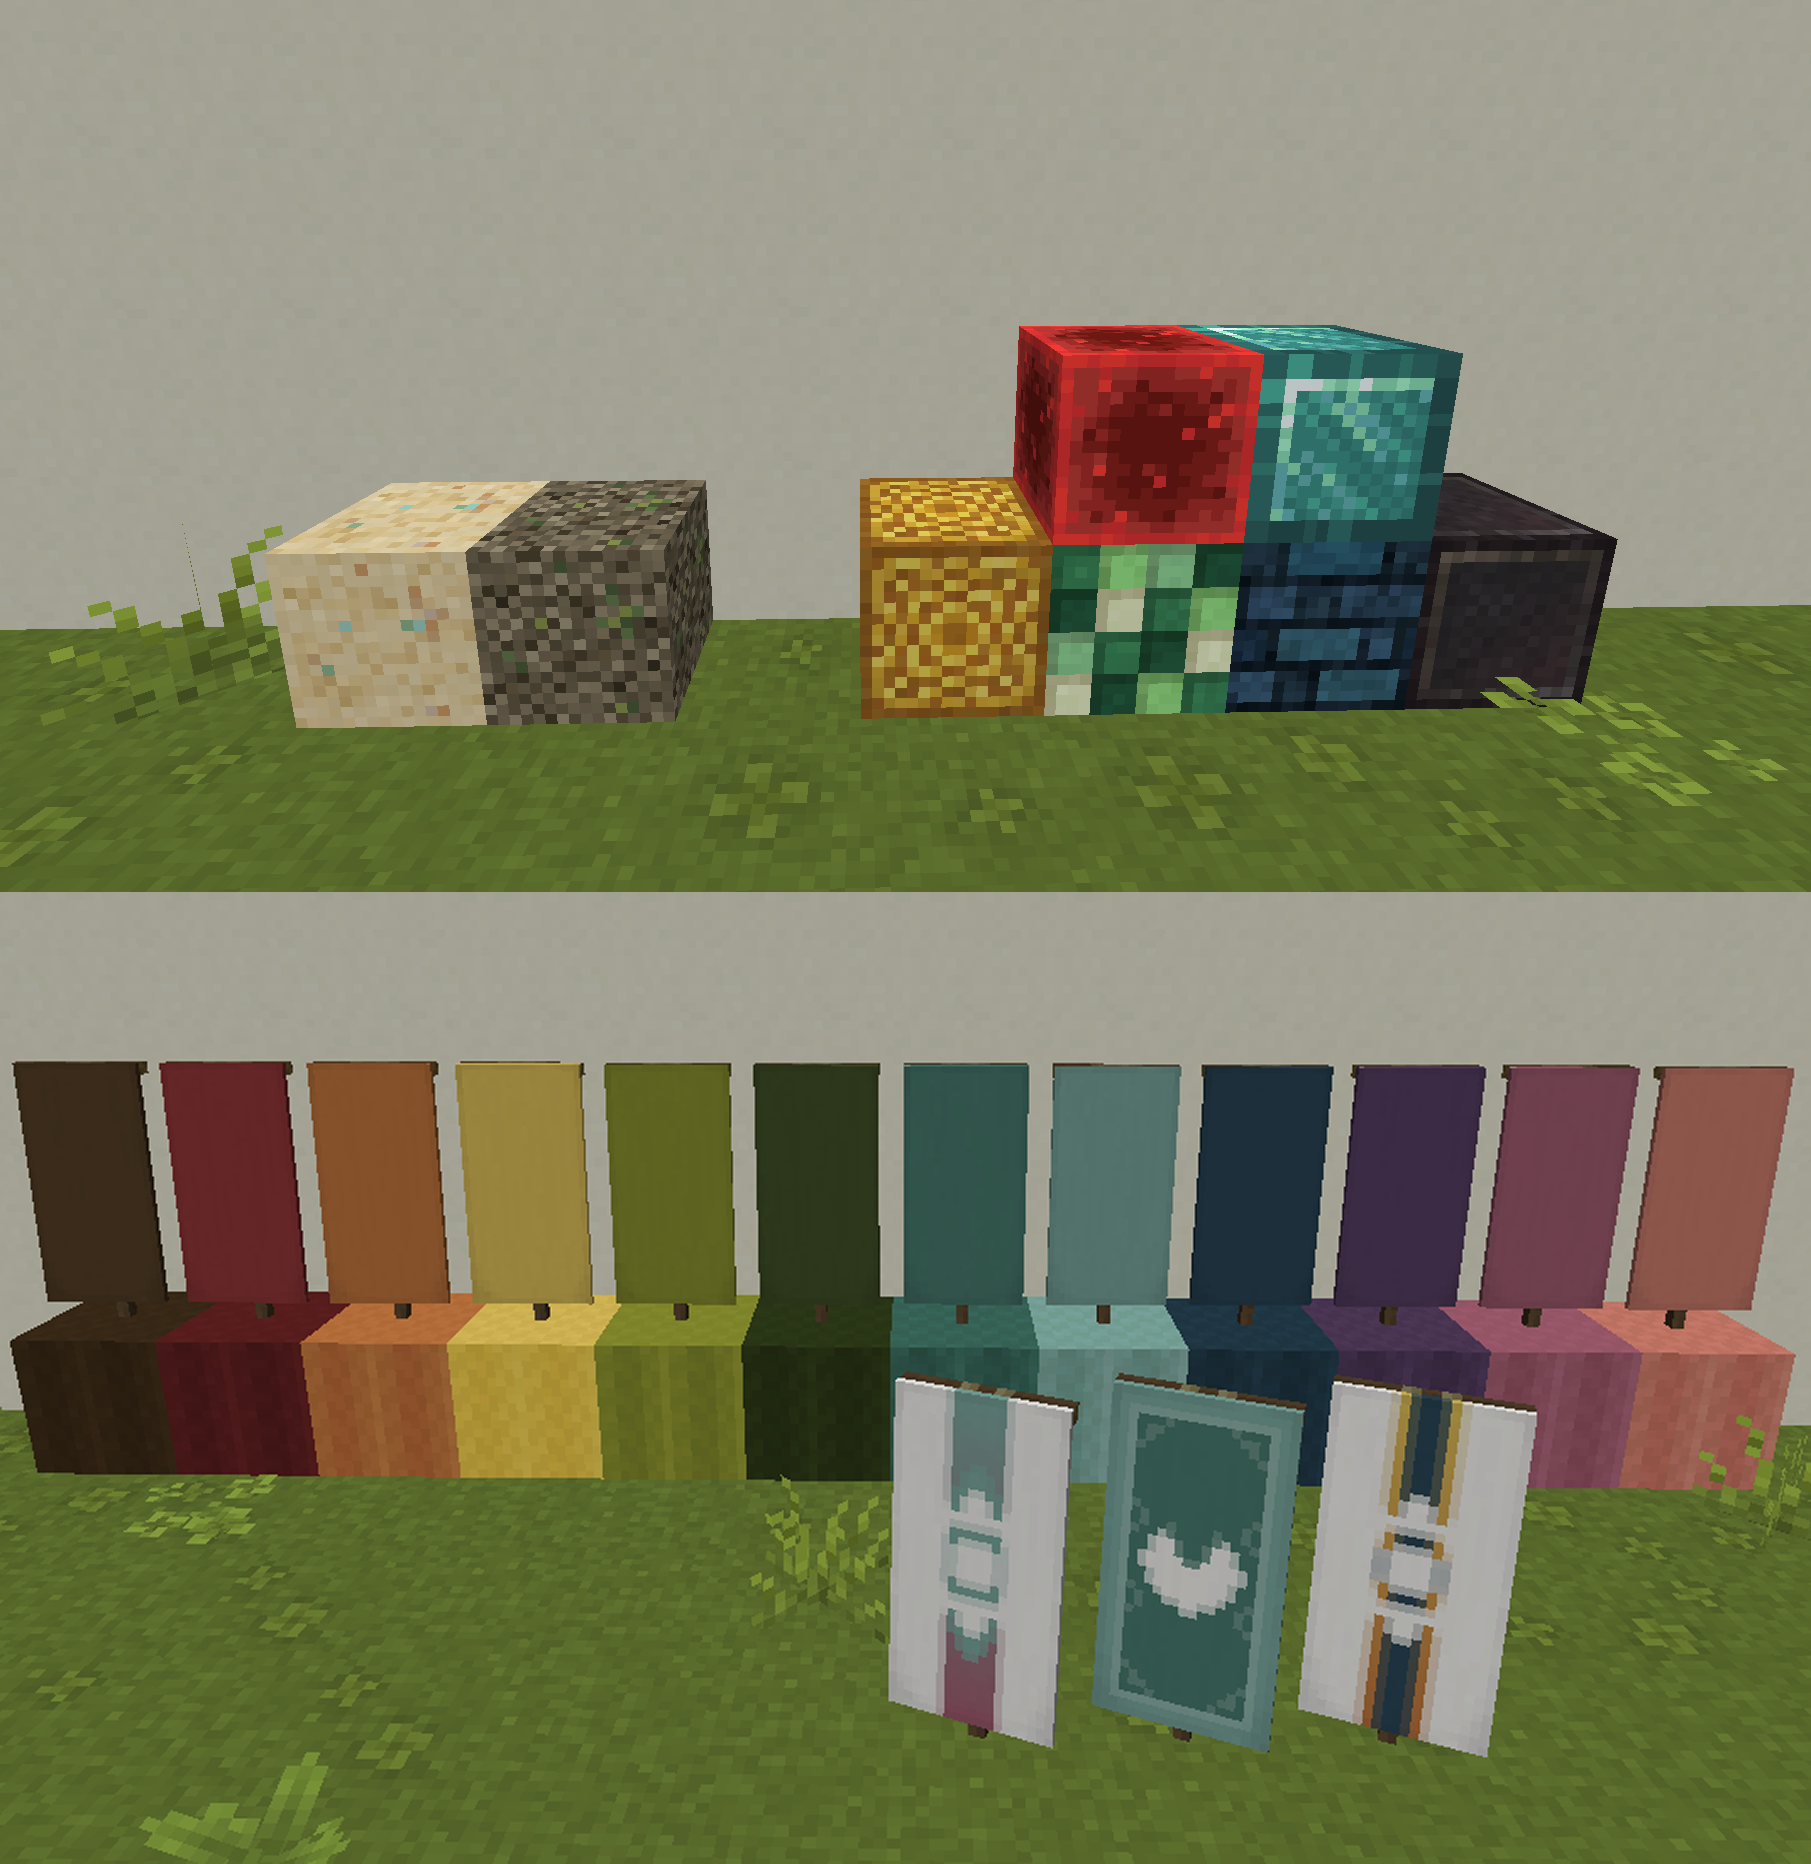 Easier to identify suspicious blocks, distinct textures for Redstone and Diamond block, banner color rematched to wool blocks